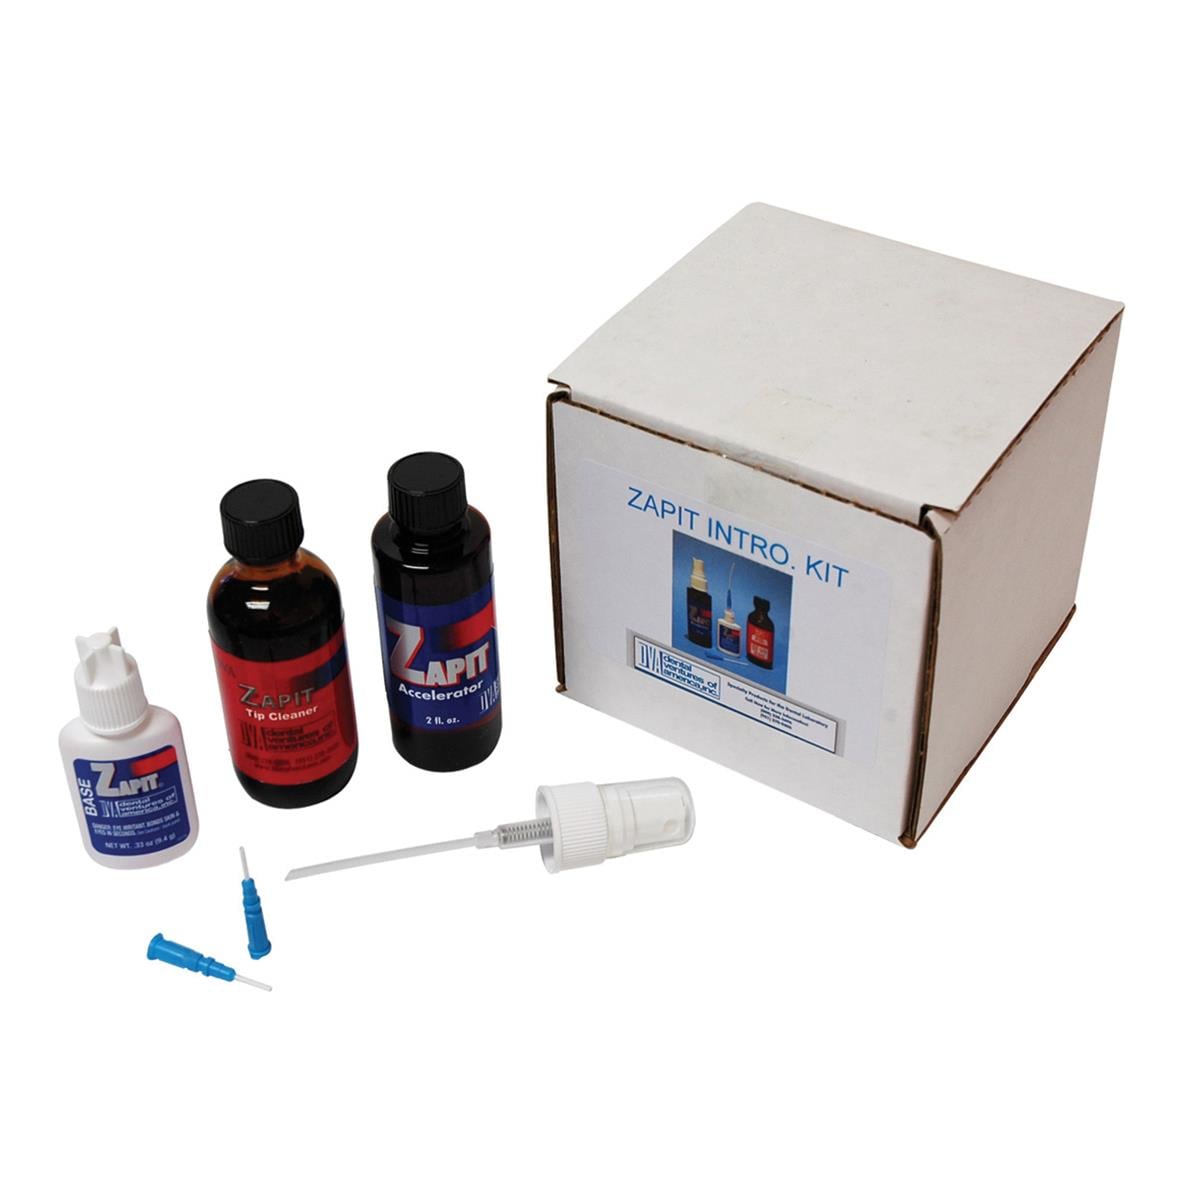 Zappit Introductory Kit